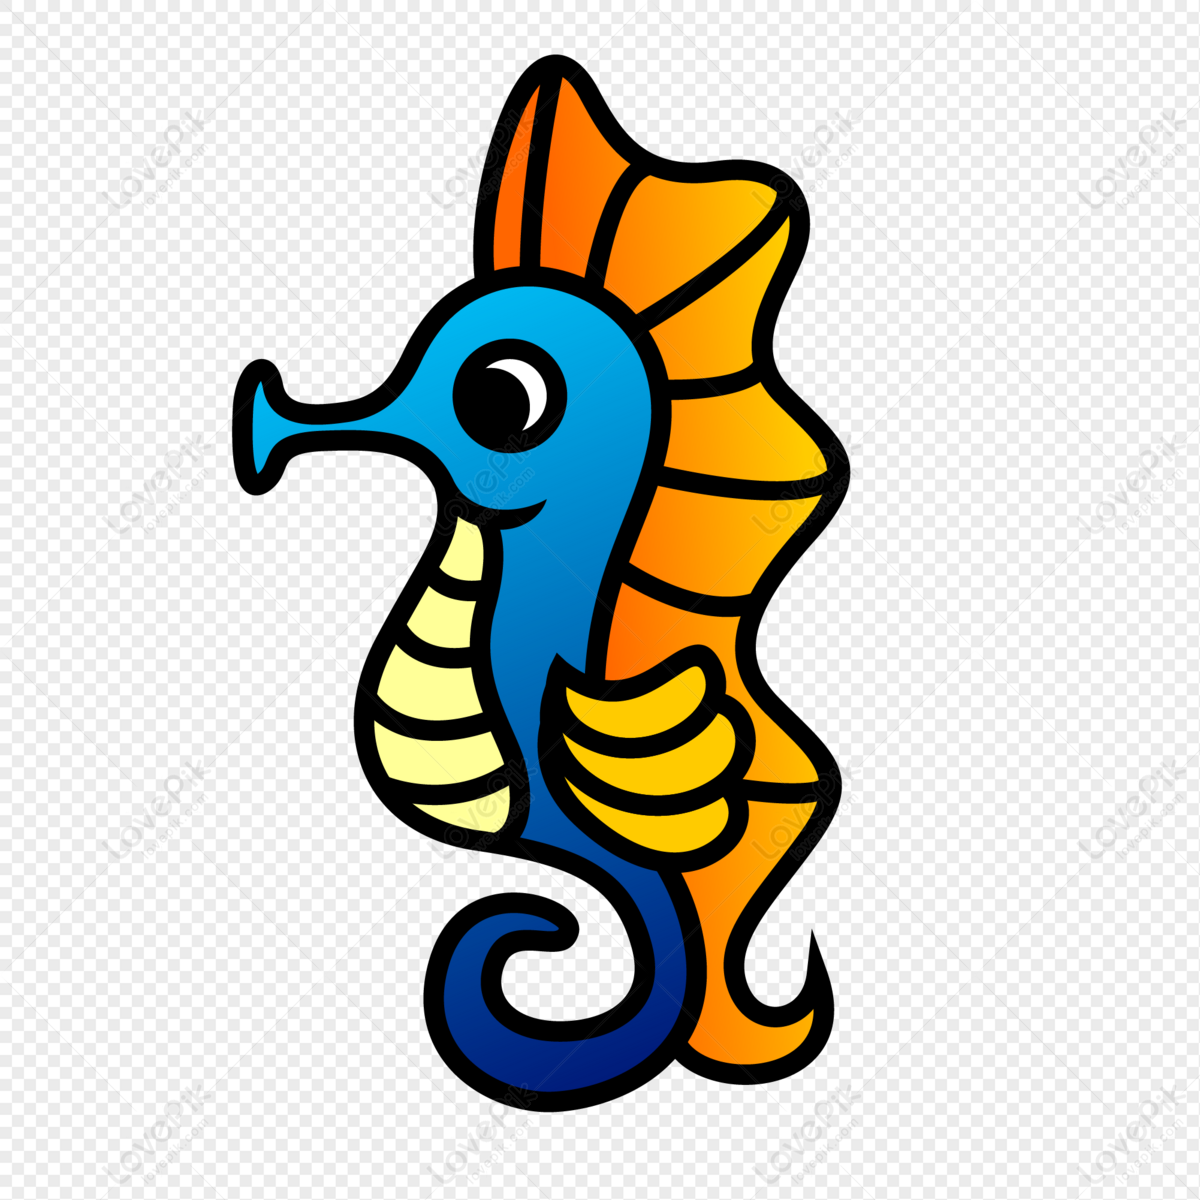 Seahorse PNG Picture And Clipart Image For Free Download - Lovepik |  401318765